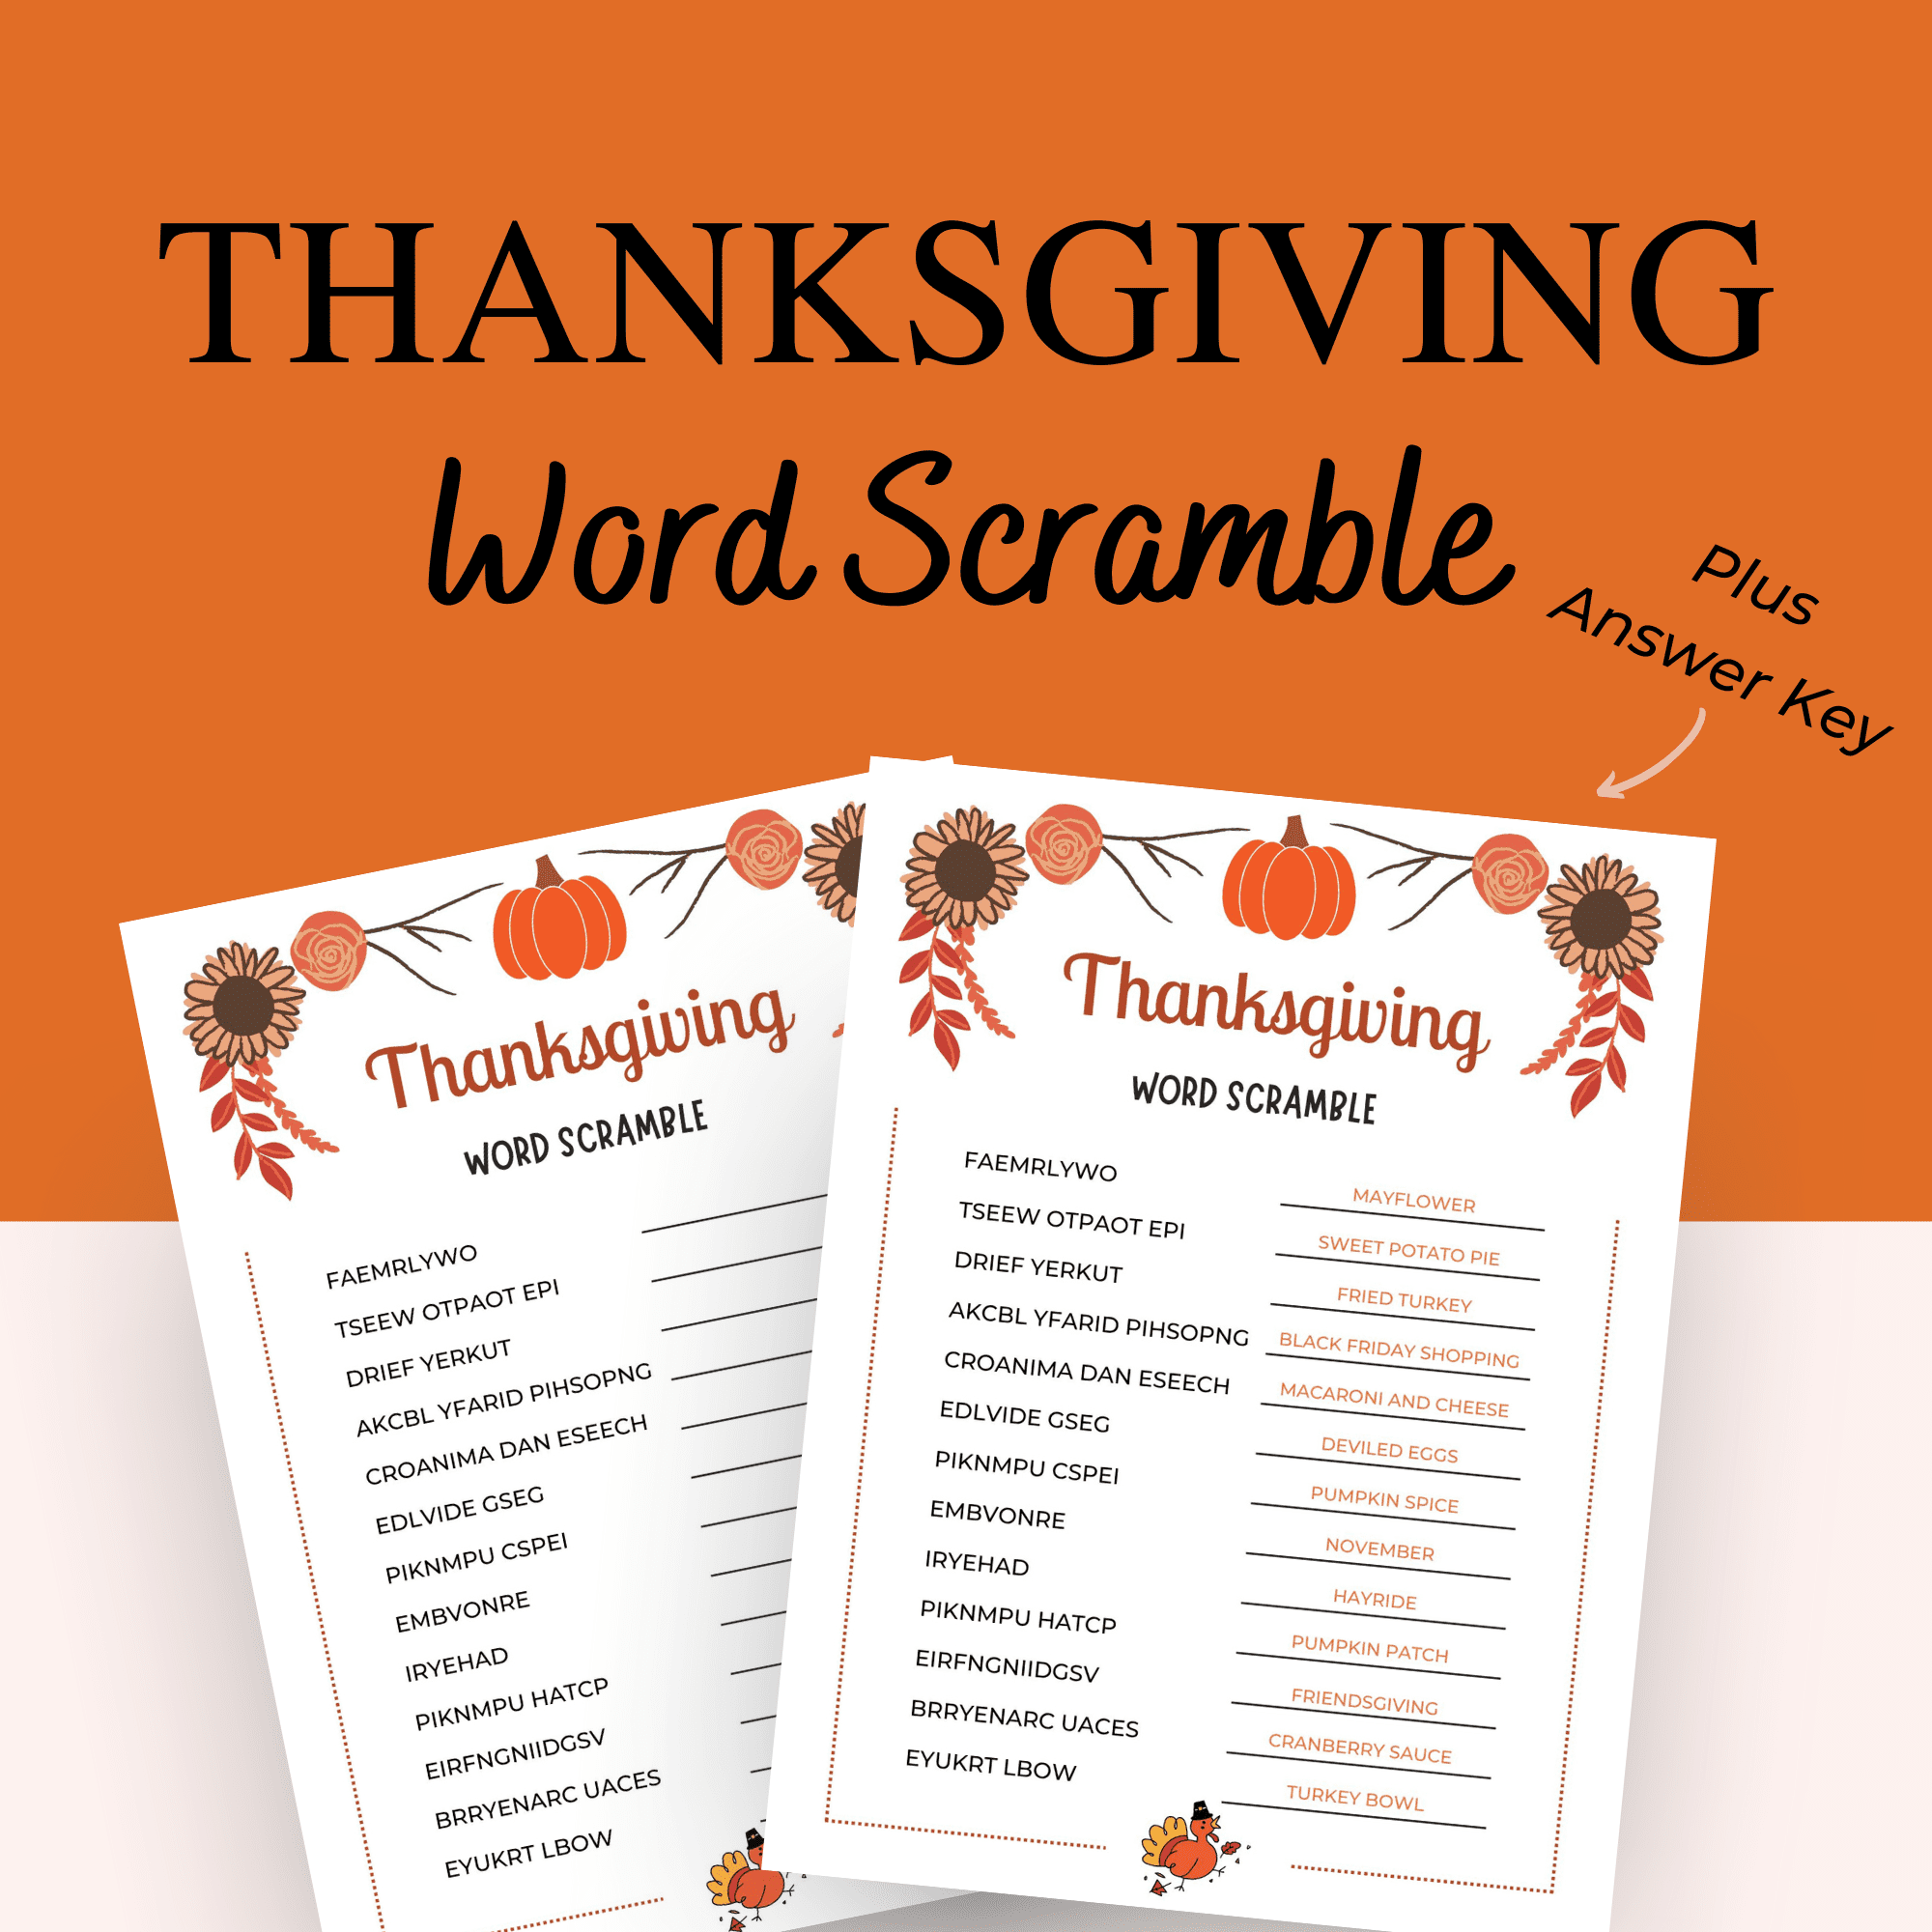 Thanksgiving Word Scramble with Answer Key